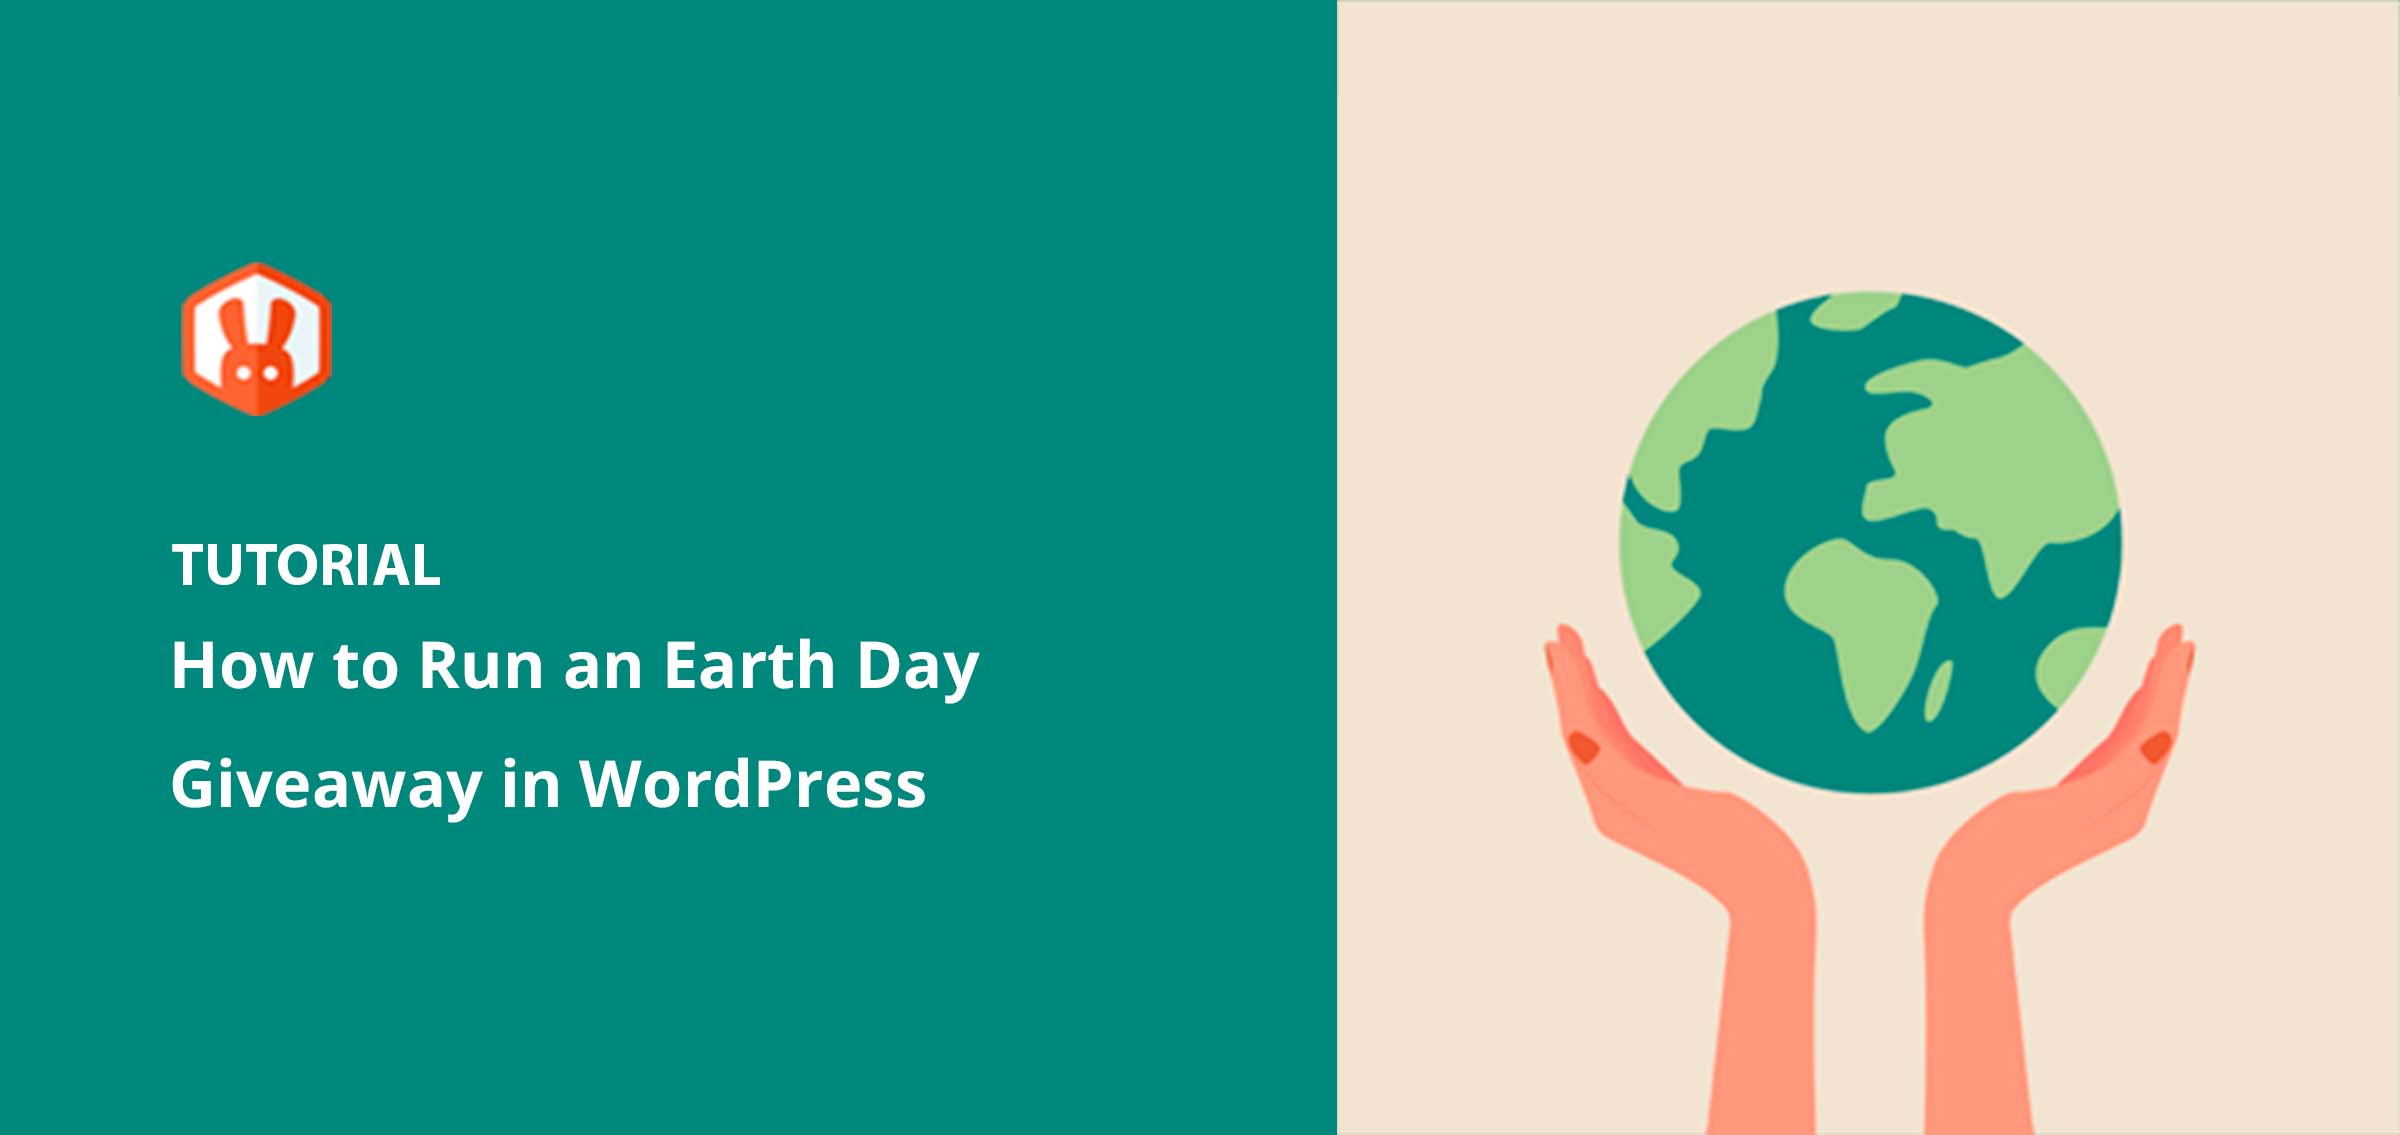 How to Run an Earth Day Giveaway